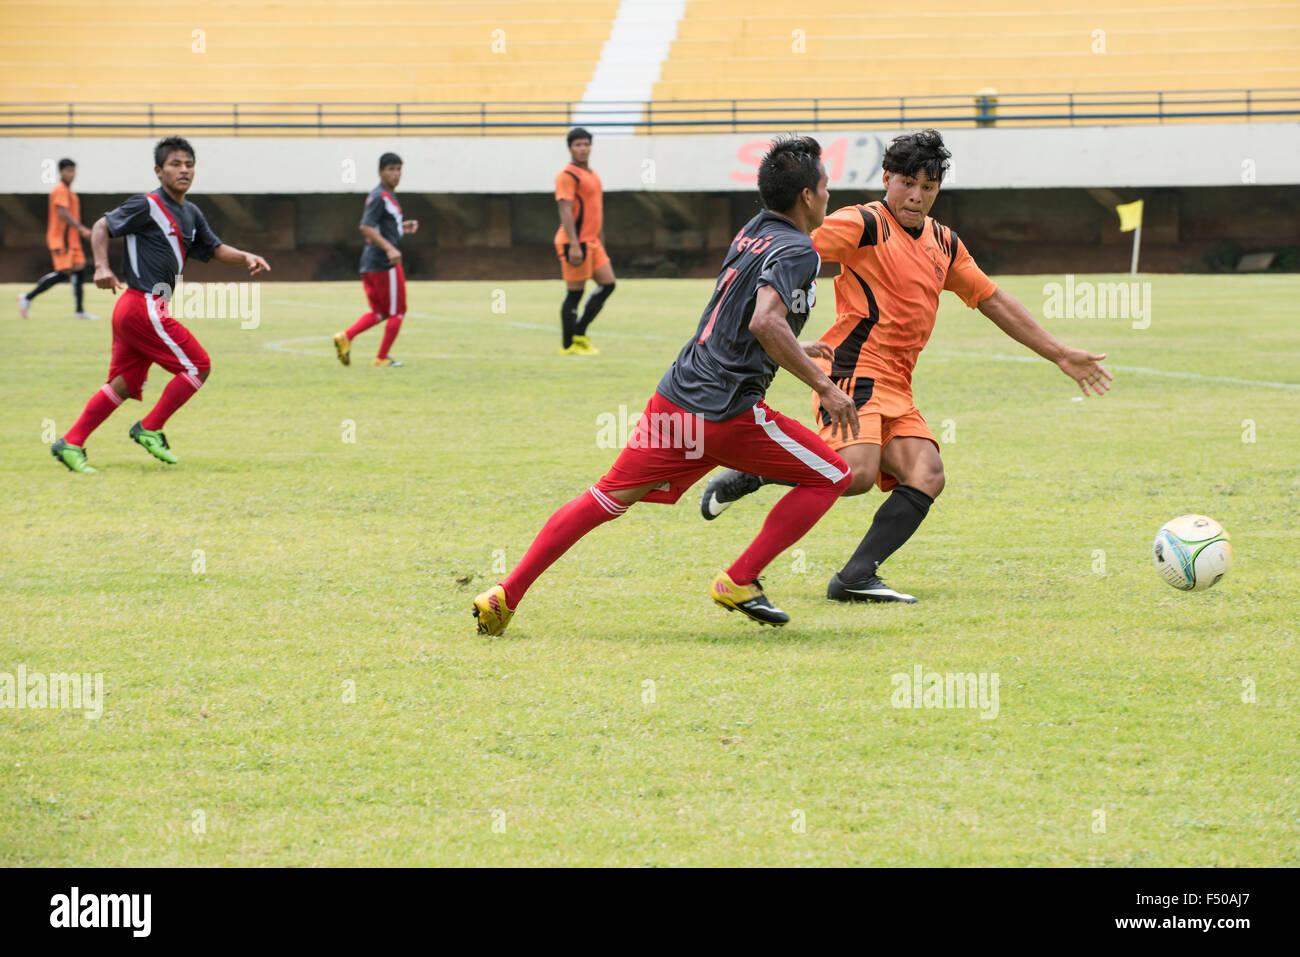 Palmas, Tocantins State, Brazil. 24th Oct, 2015. players compete for the ball during an all Peru vs Kuikuro ethnic group football match at the first ever International Indigenous Games, in the city of Palmas, Tocantins State, Brazil. Photo Credit:  Sue Cunningham Photographic/Alamy Live News Stock Photo